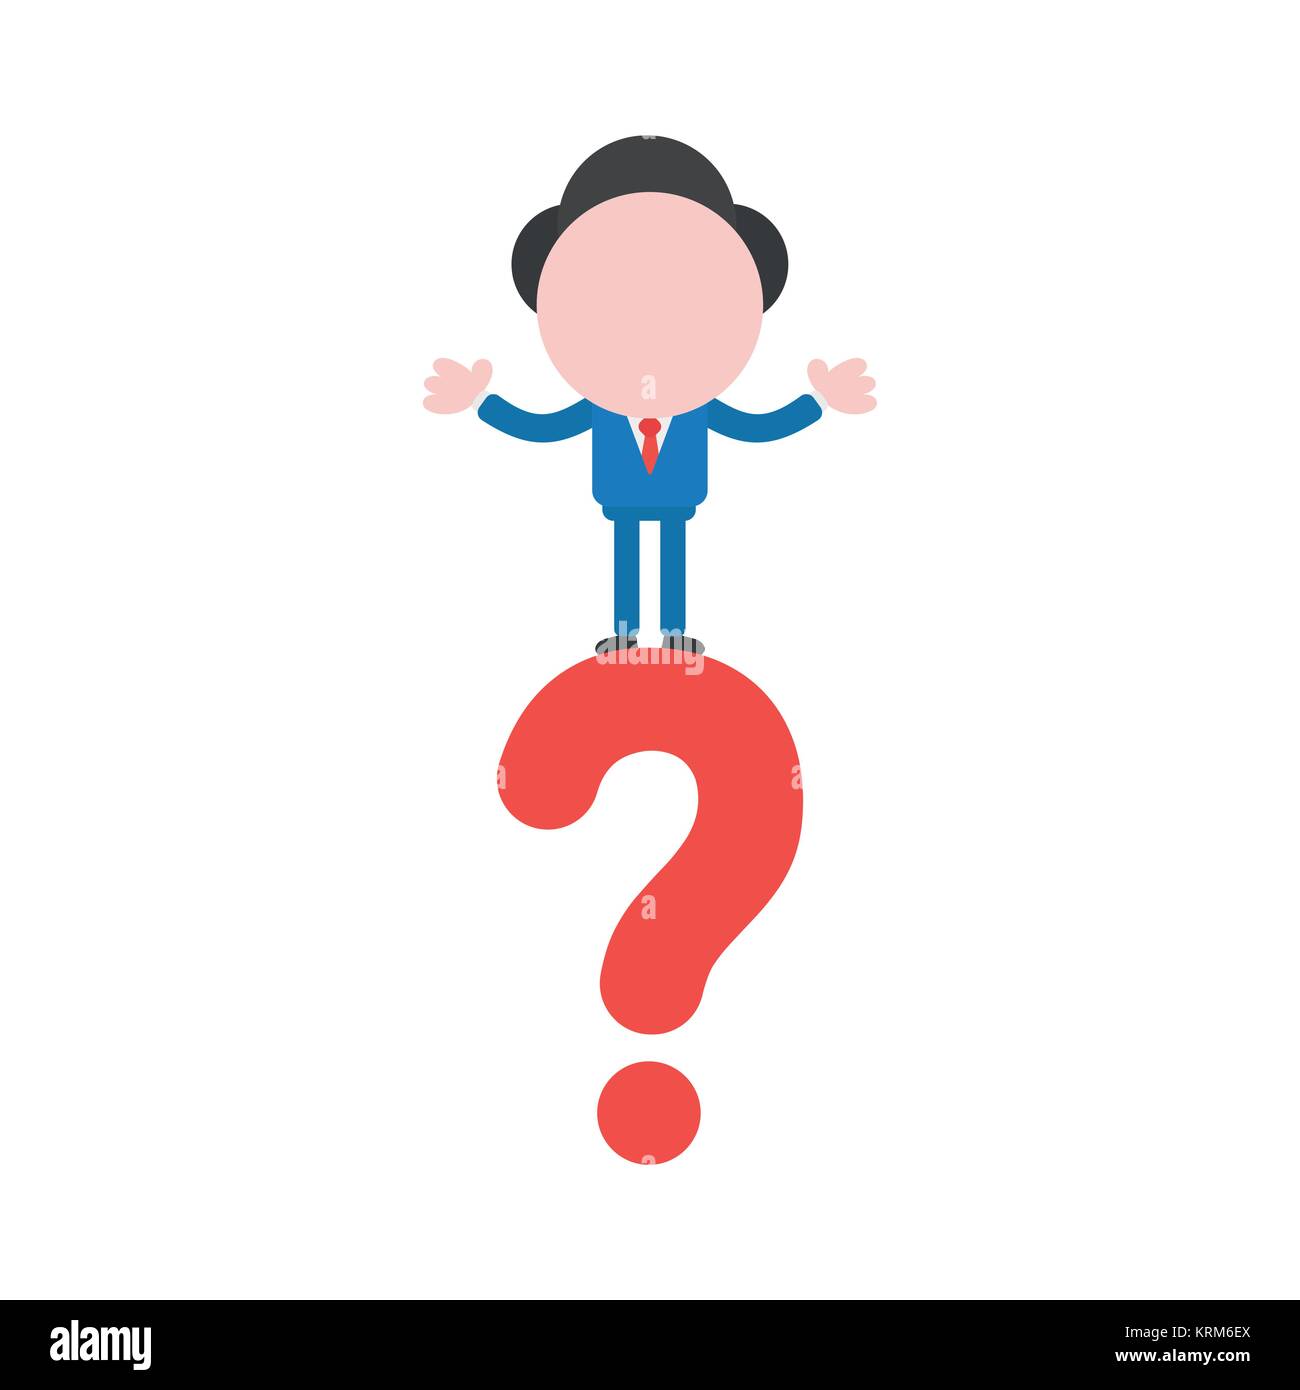 Vector cartoon illustration concept of faceless businessman mascot character on red question mark symbol icon. Stock Vector